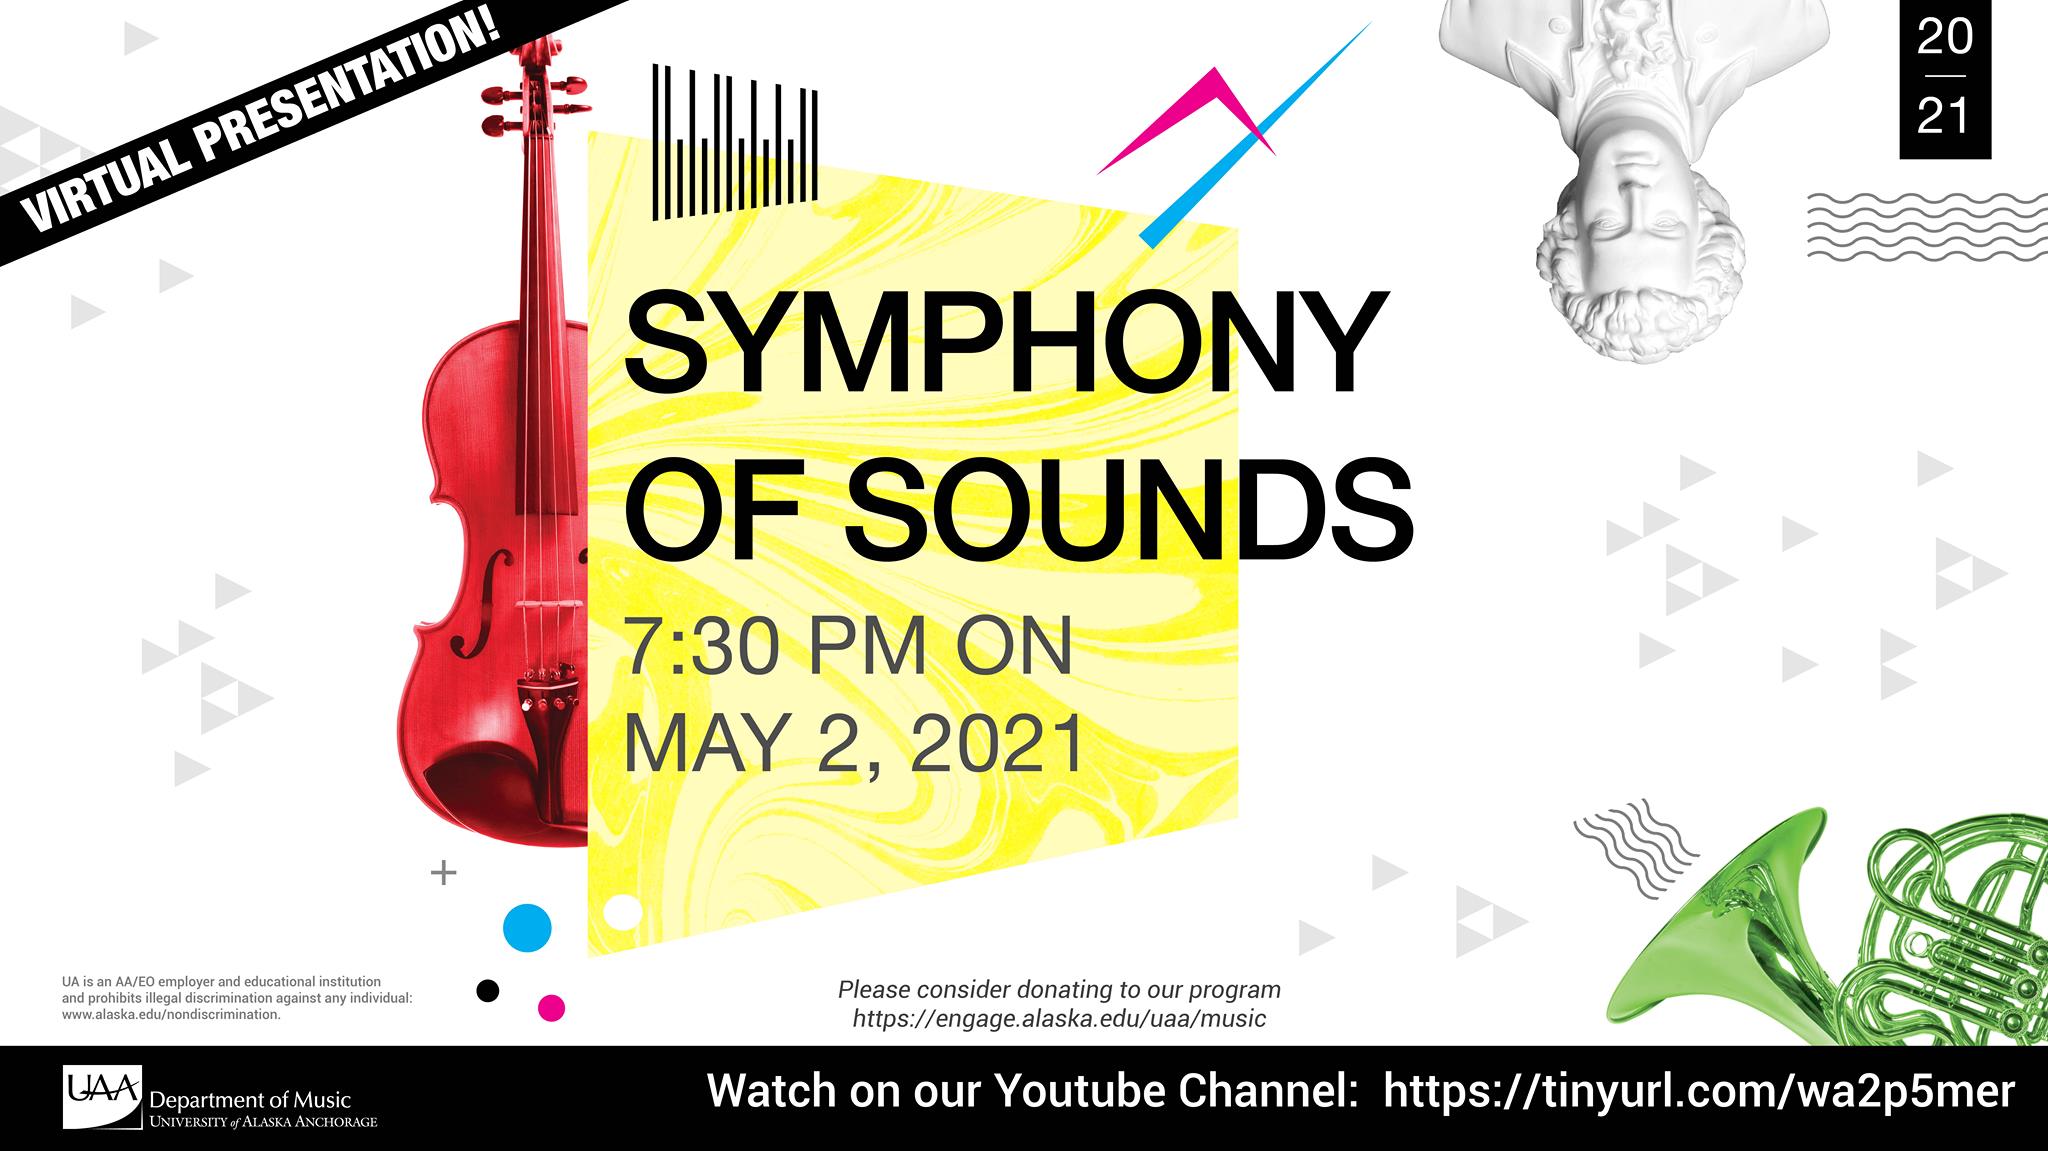 Symphony of Sounds Sunday, May 2, 7:30 p.m. Virtual presentation! Join us on our YouTube Channel at tinyurl.com/wa2p5mer